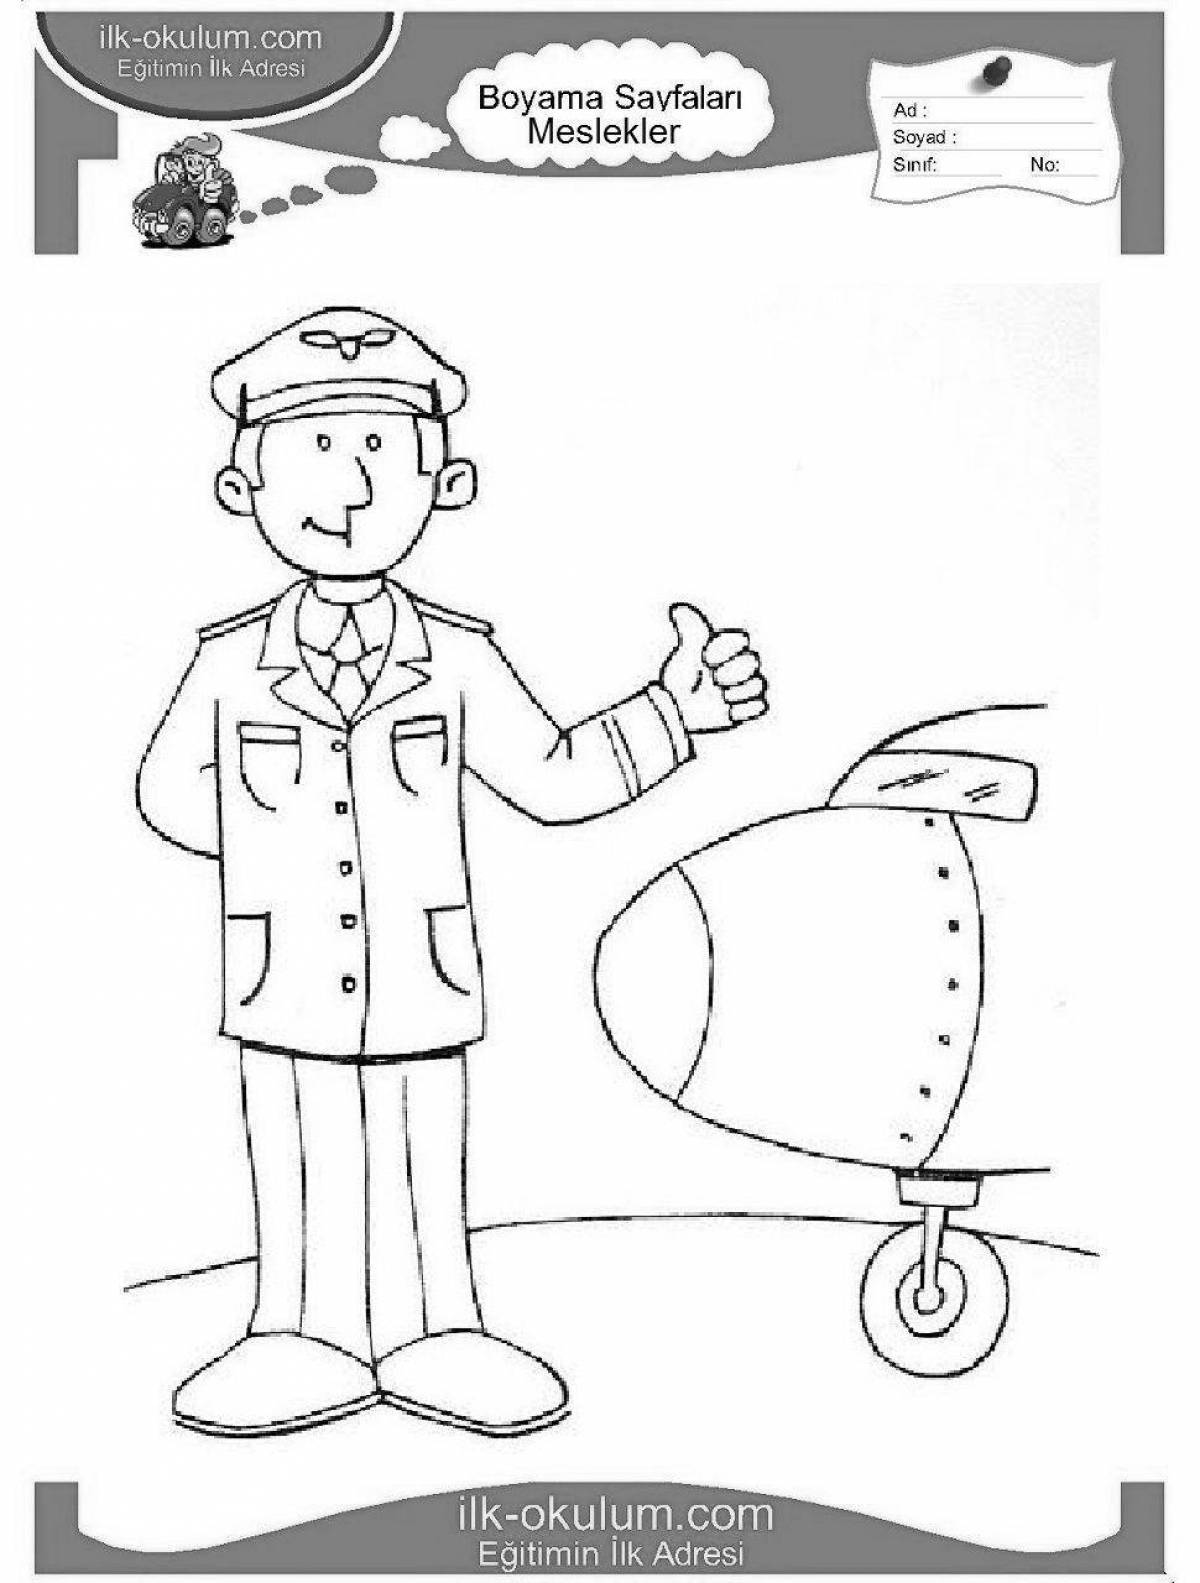 An entertaining coloring book about the military profession for preschoolers